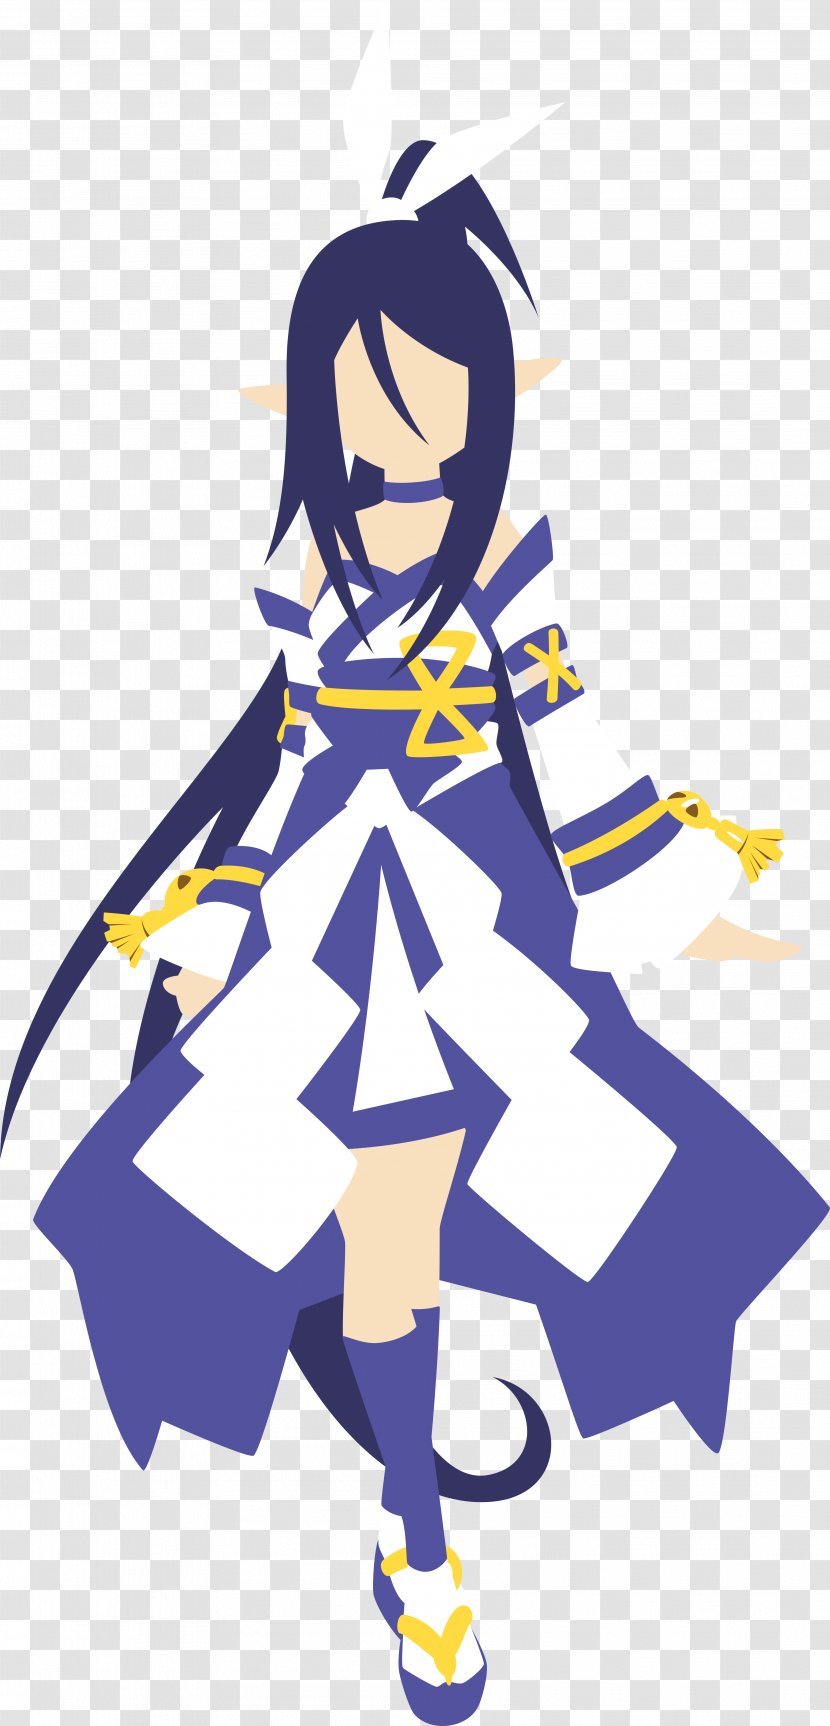 Mugen Souls PlayStation 3 Video Game Role-playing 4 - Hyperdimension Neptunia - Graceful Transparent PNG